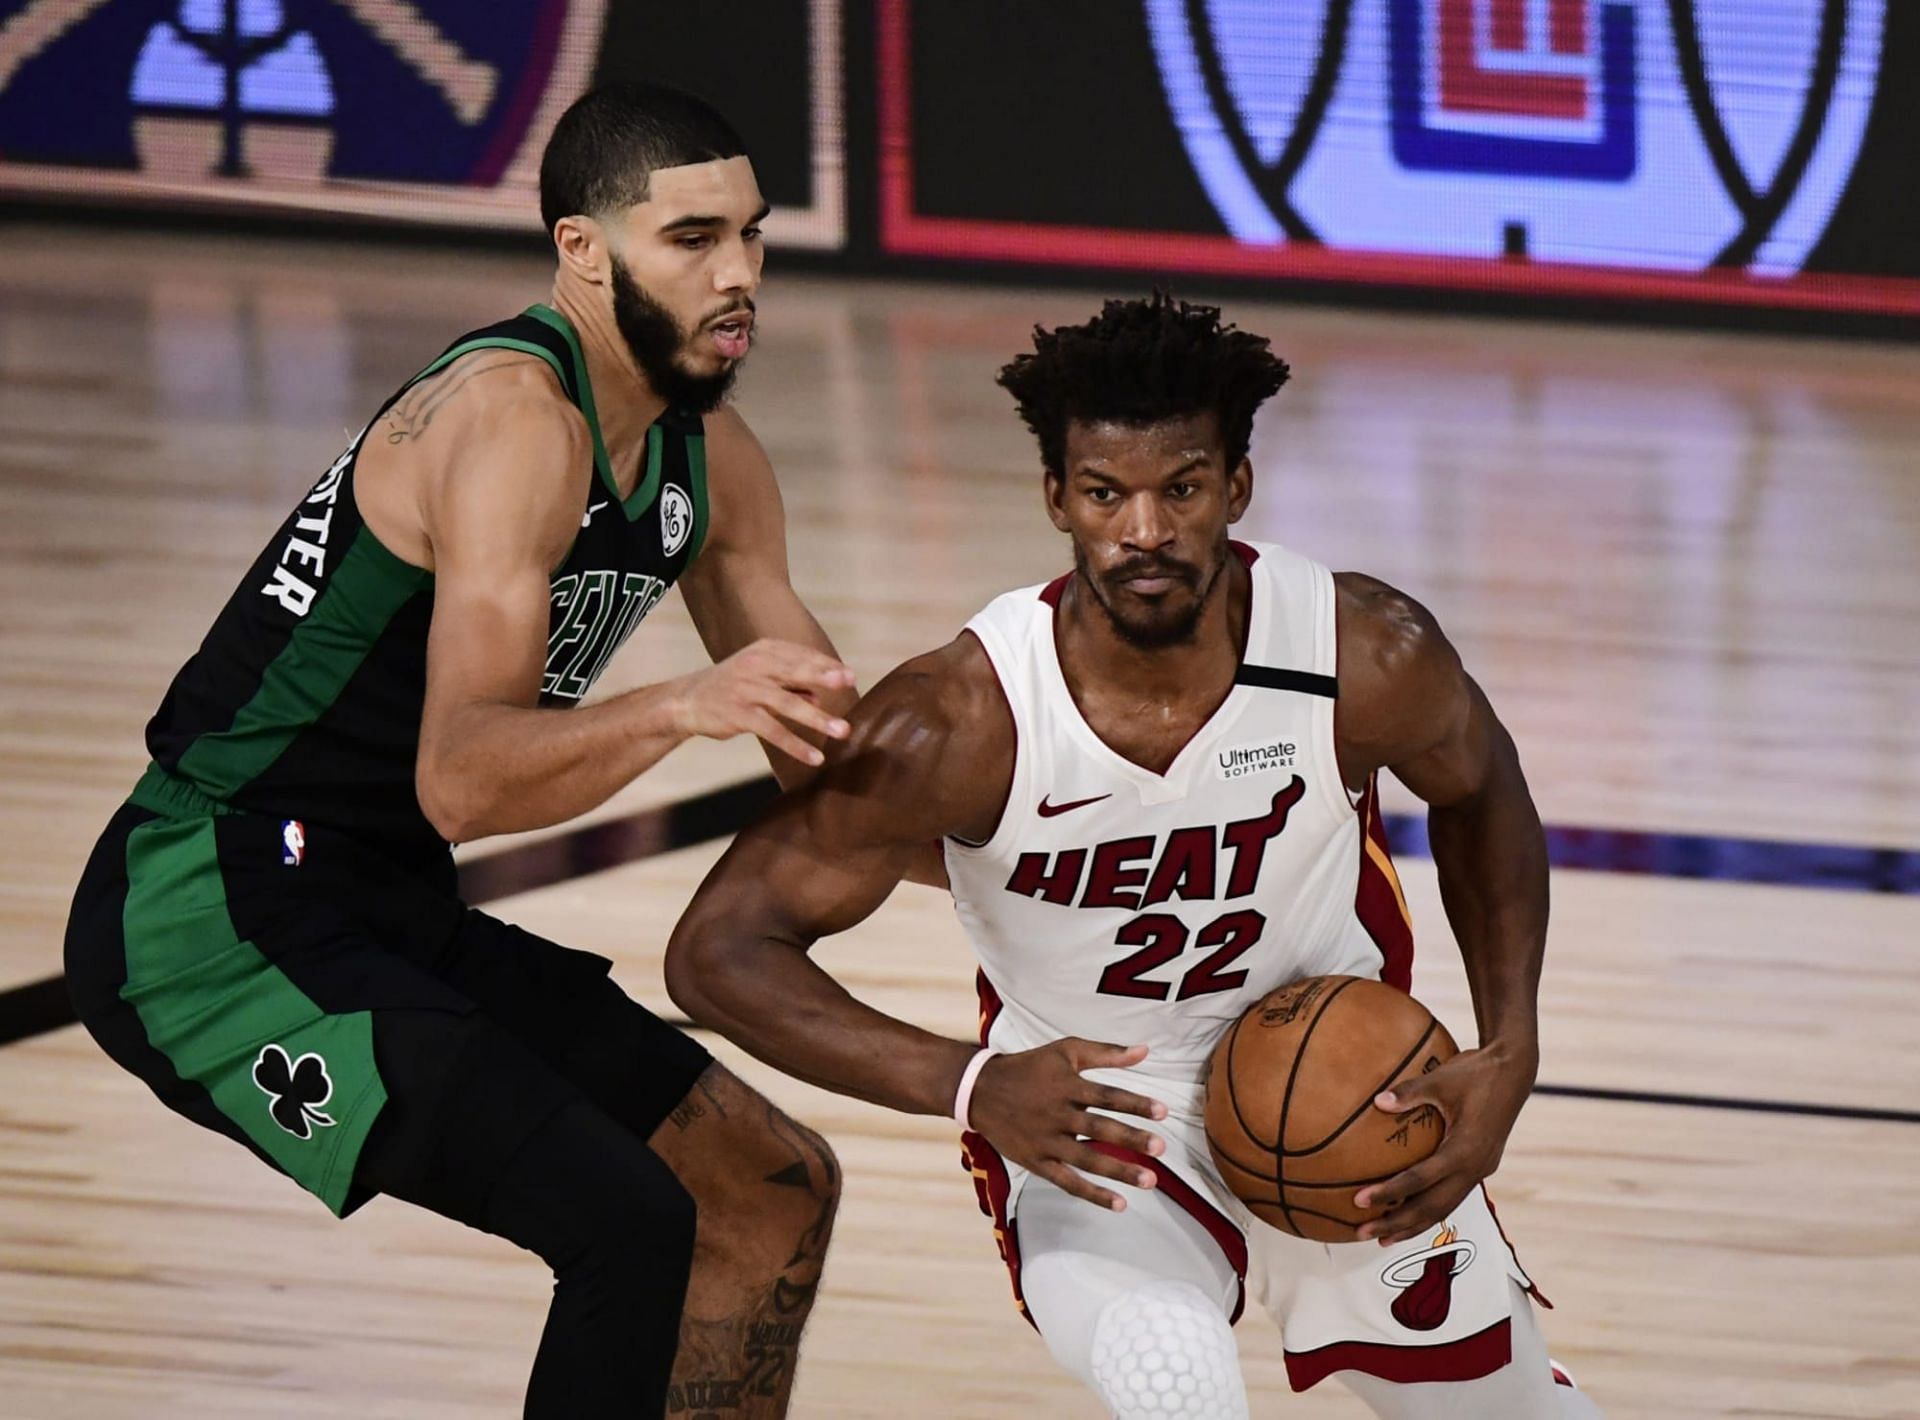 The visiting Miami Heat are looking to even the season series against the Boston Celtics when they meet again on Monday. [Photo: Hardwood Houdini]